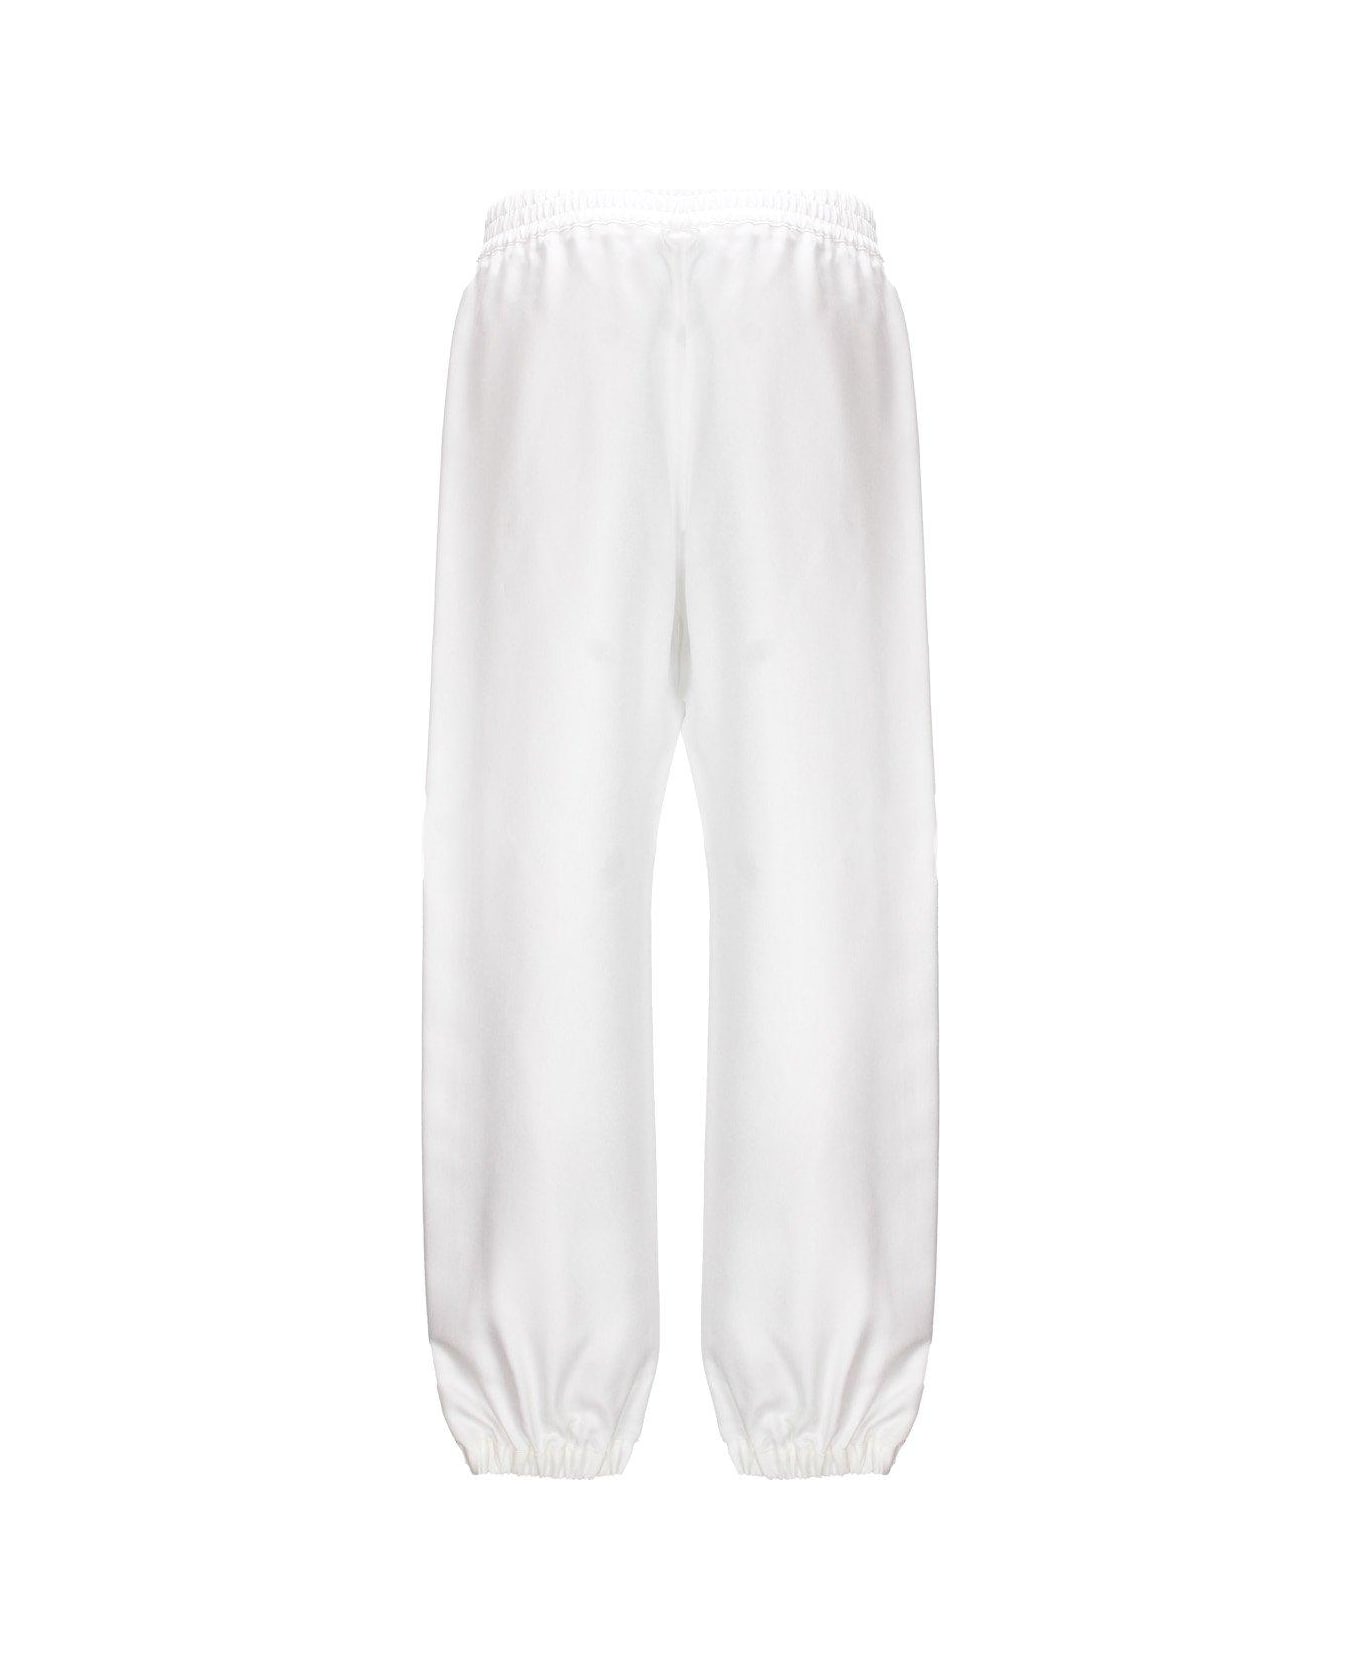 Moncler Side Striped Trousers - White